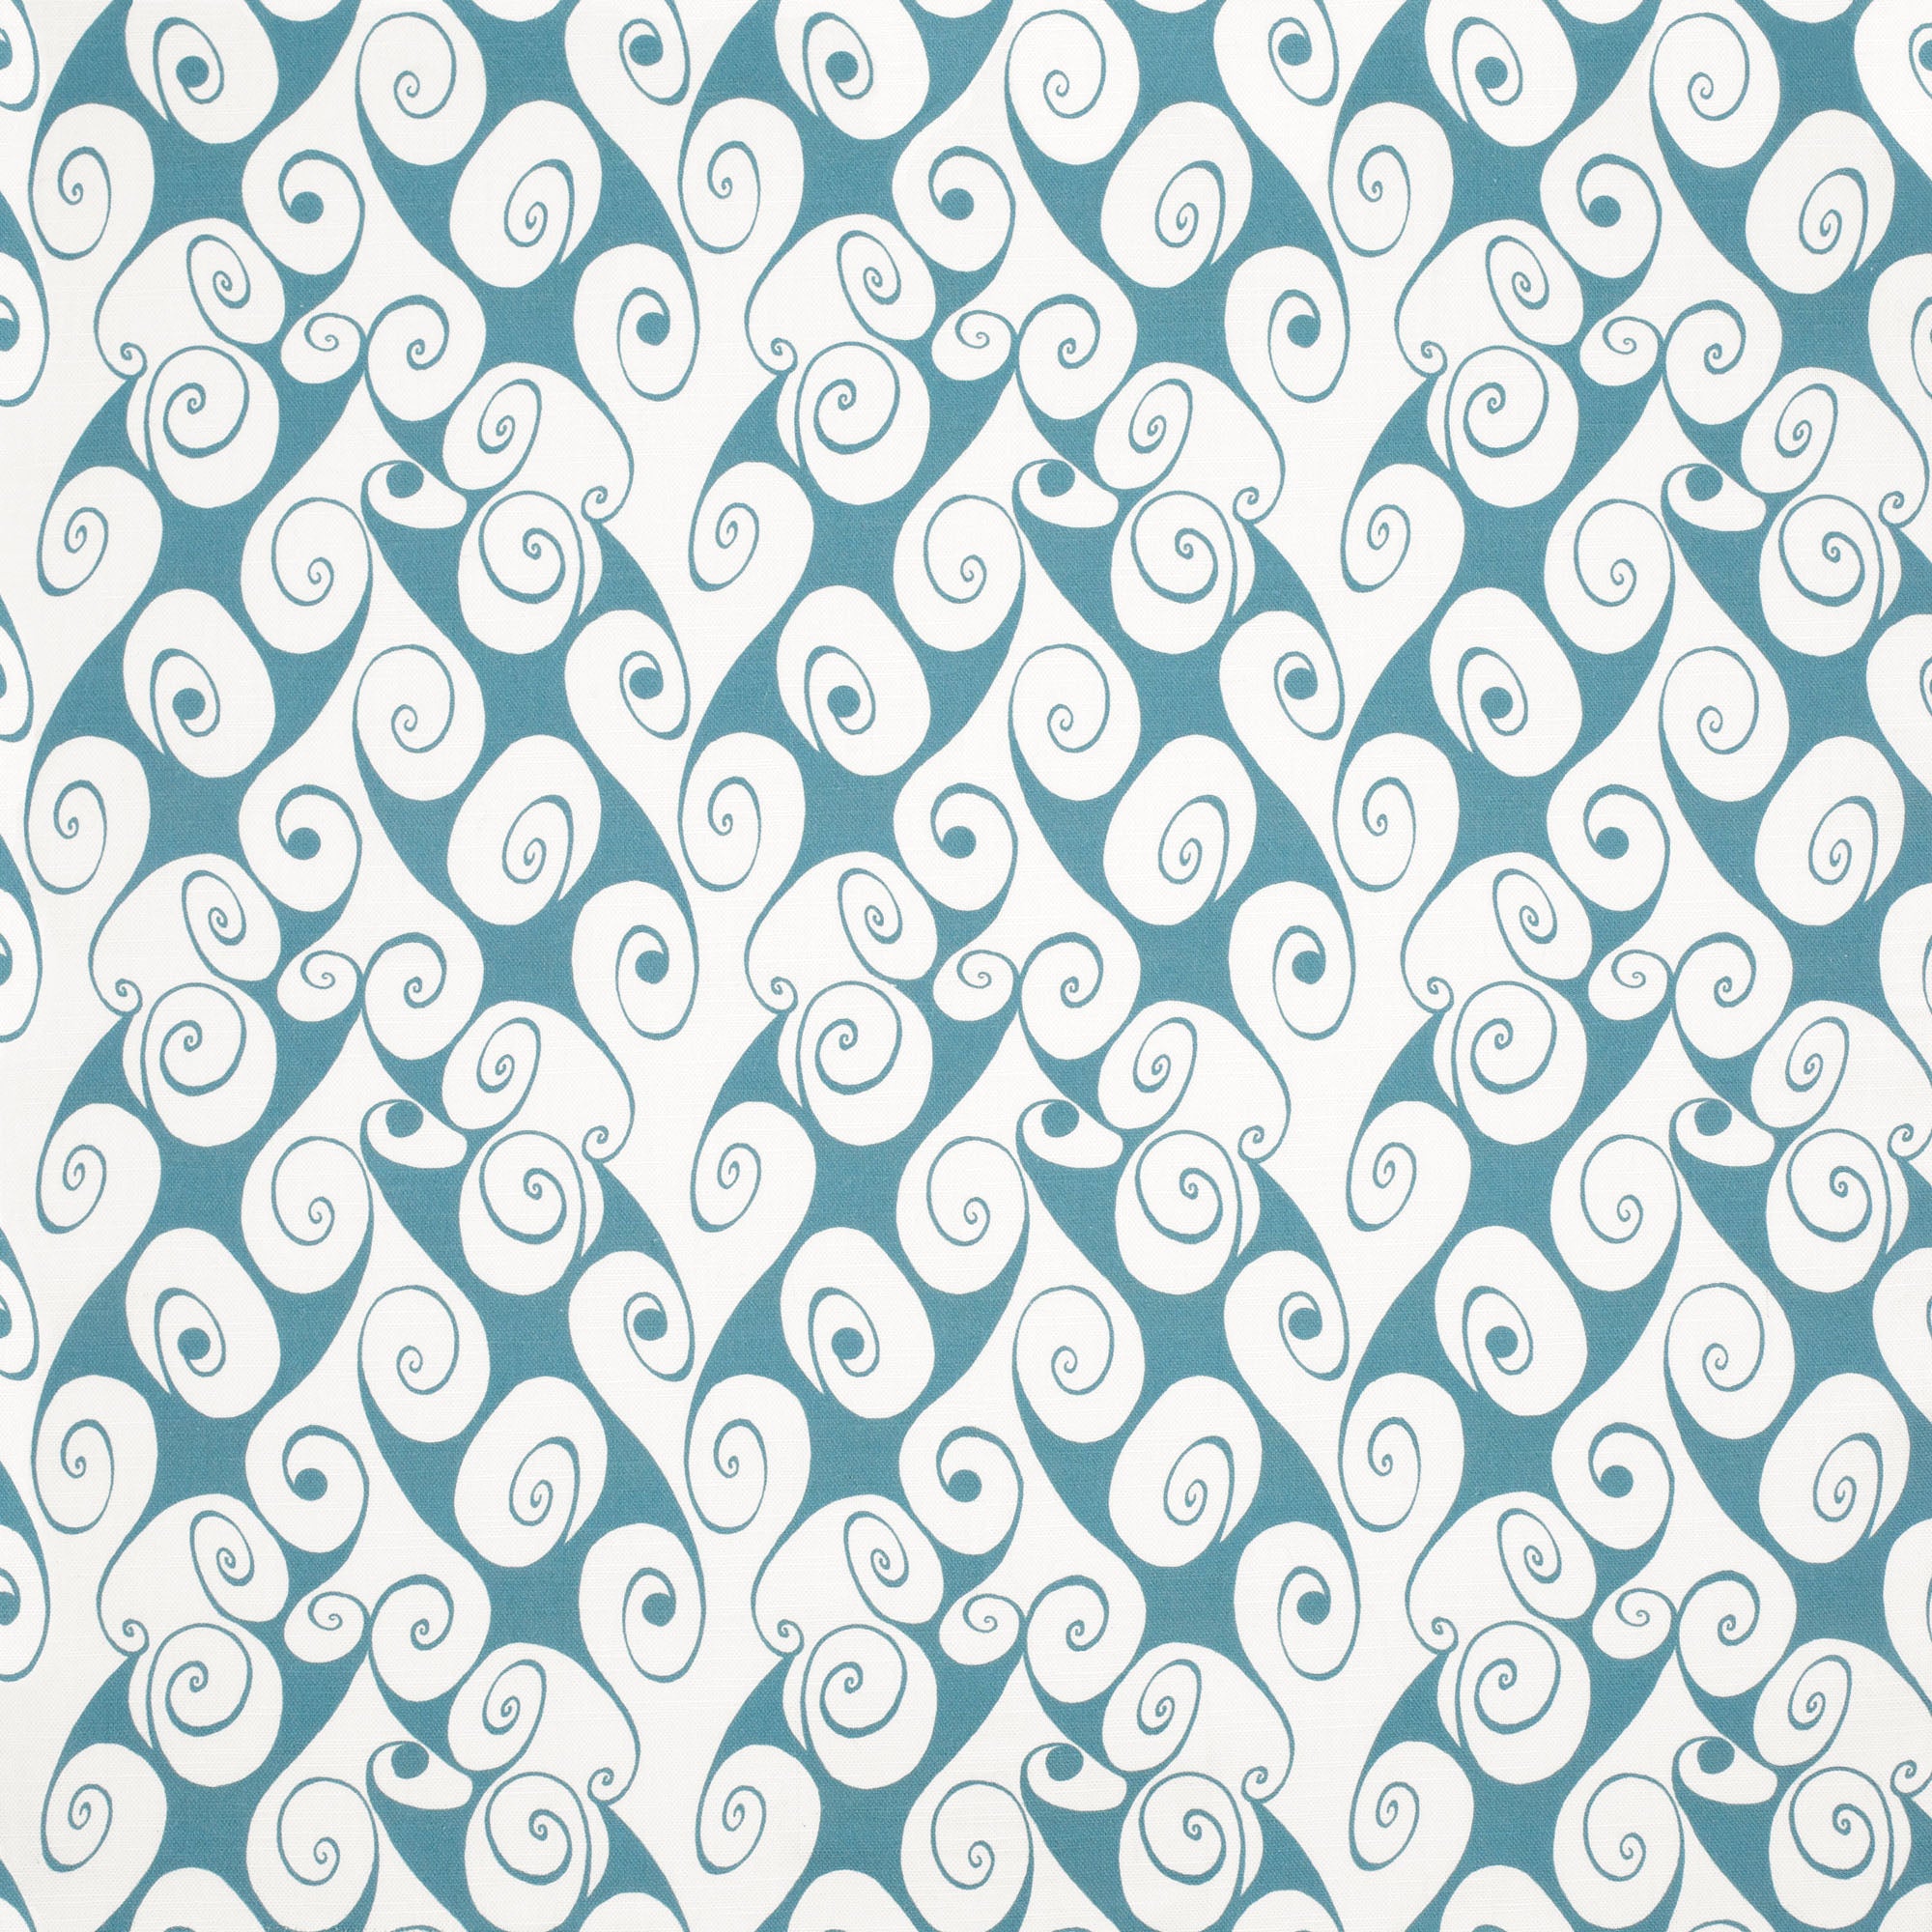 Detail of fabric in a playful abstract shape print in white on a turquoise field.